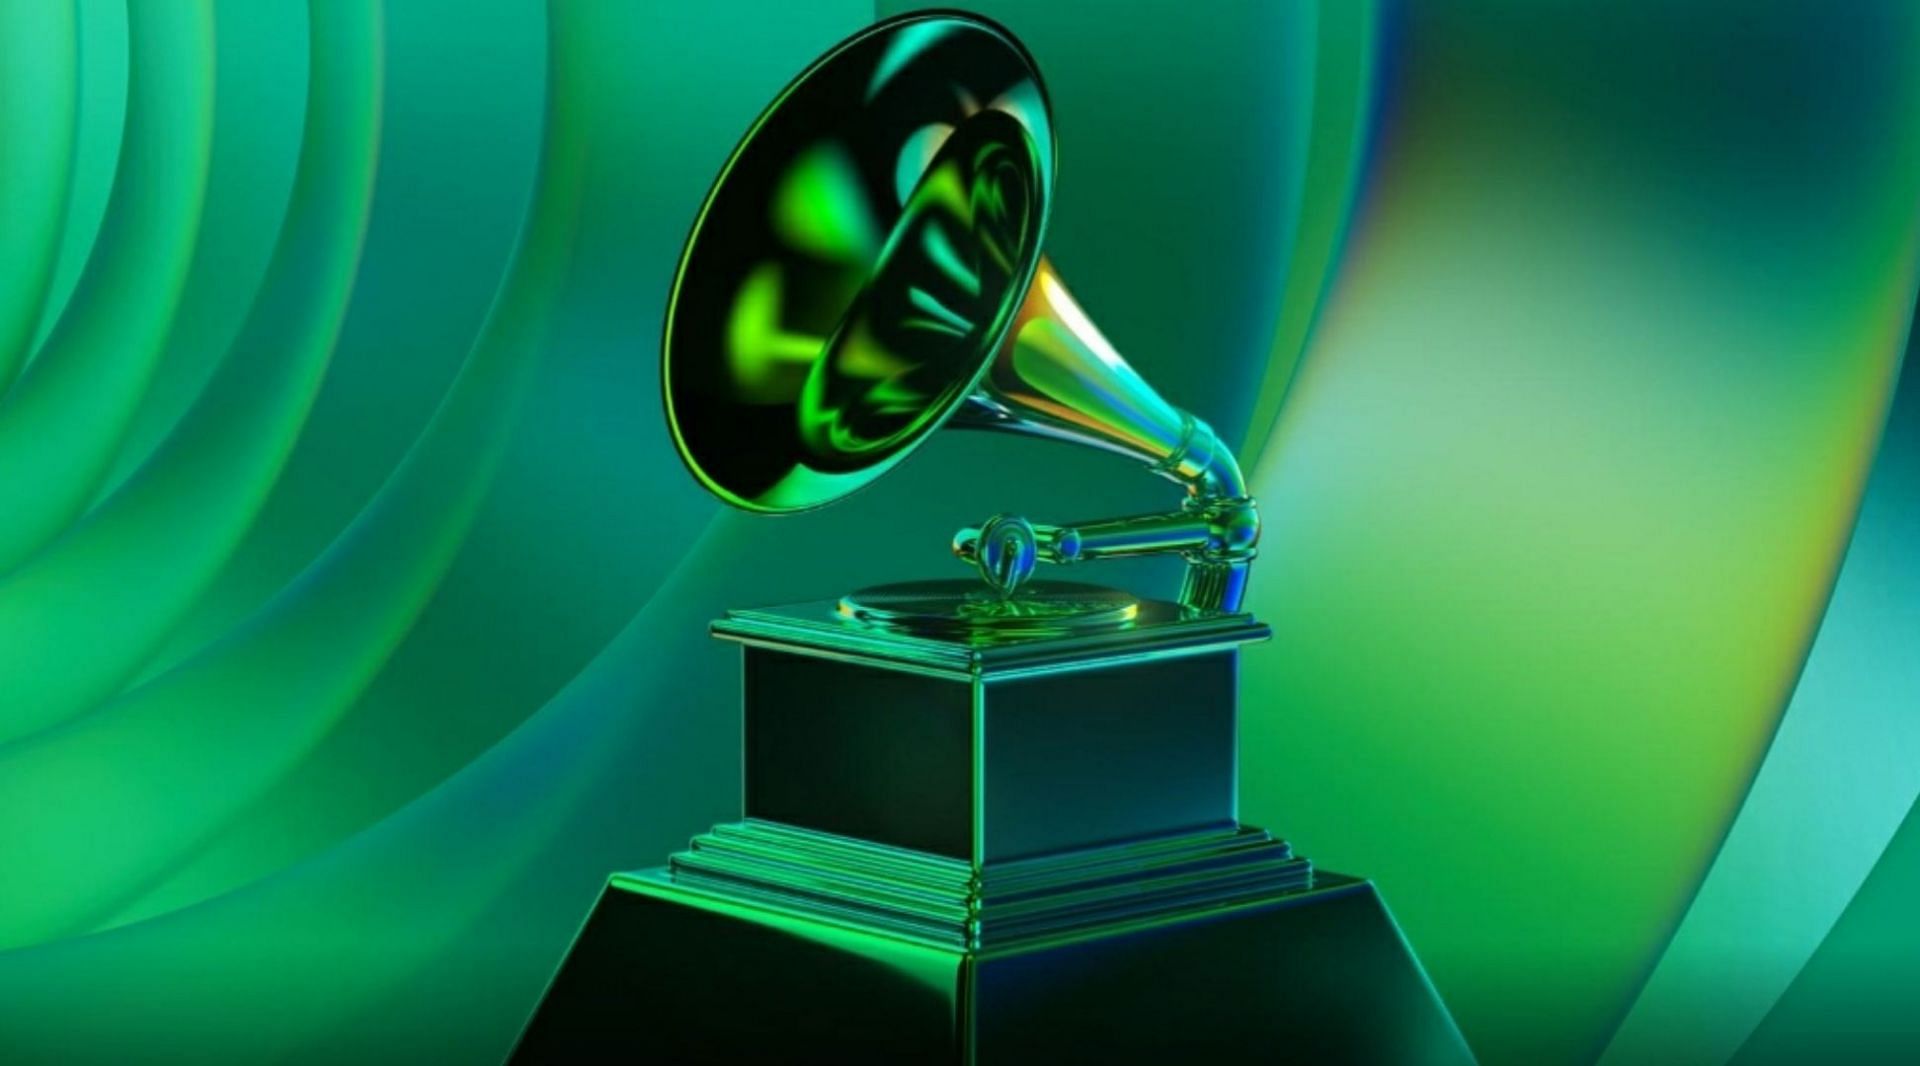 The recording academy has indefinitely postponed the 64th Grammy Awards amid Omicron concerns. (Image via GRAMMY.com)